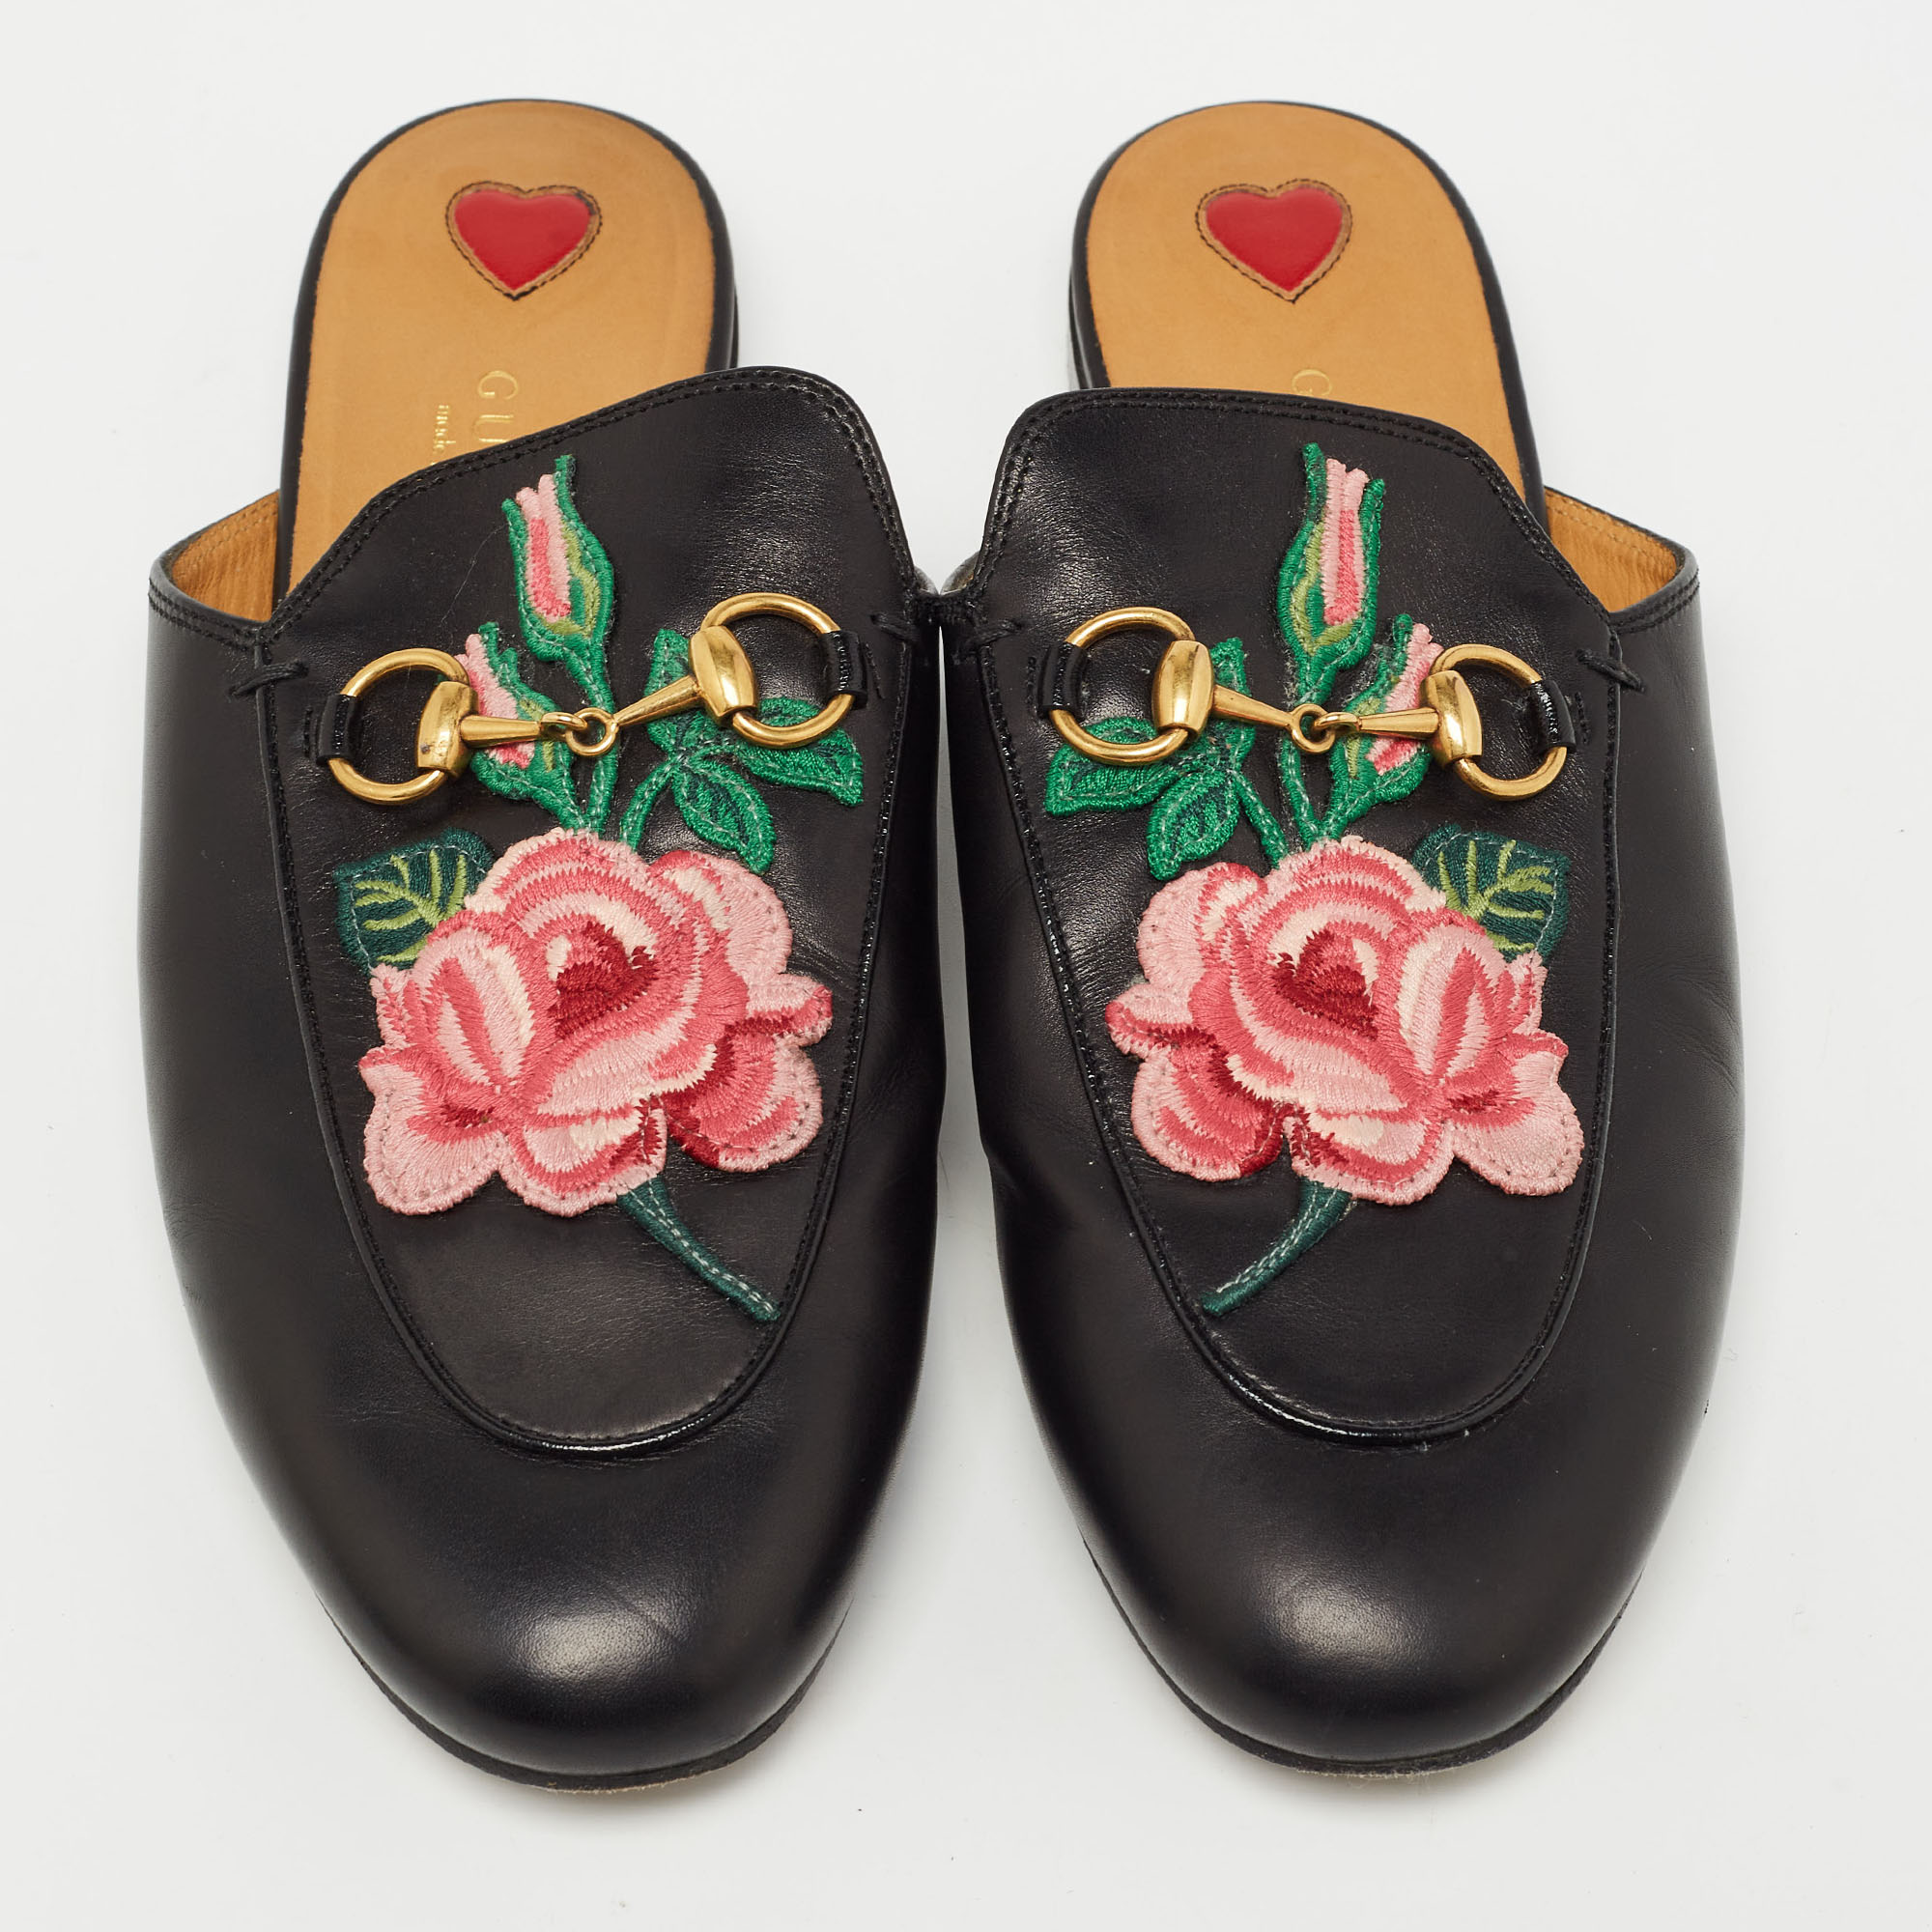 Gucci Black Leather Rose Embroidered Princetown Horsebit Flat Mules Size 37